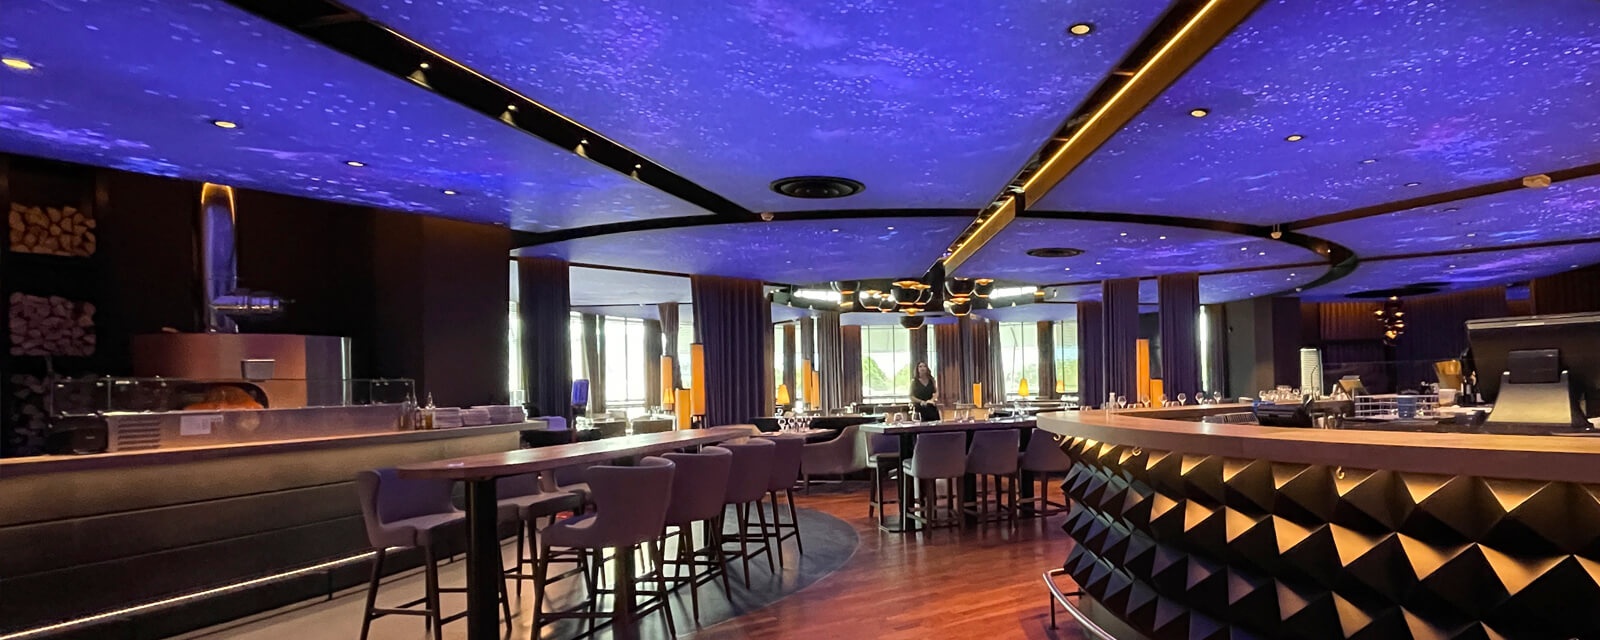 Amazing cosmic ceiling for a trendy club!